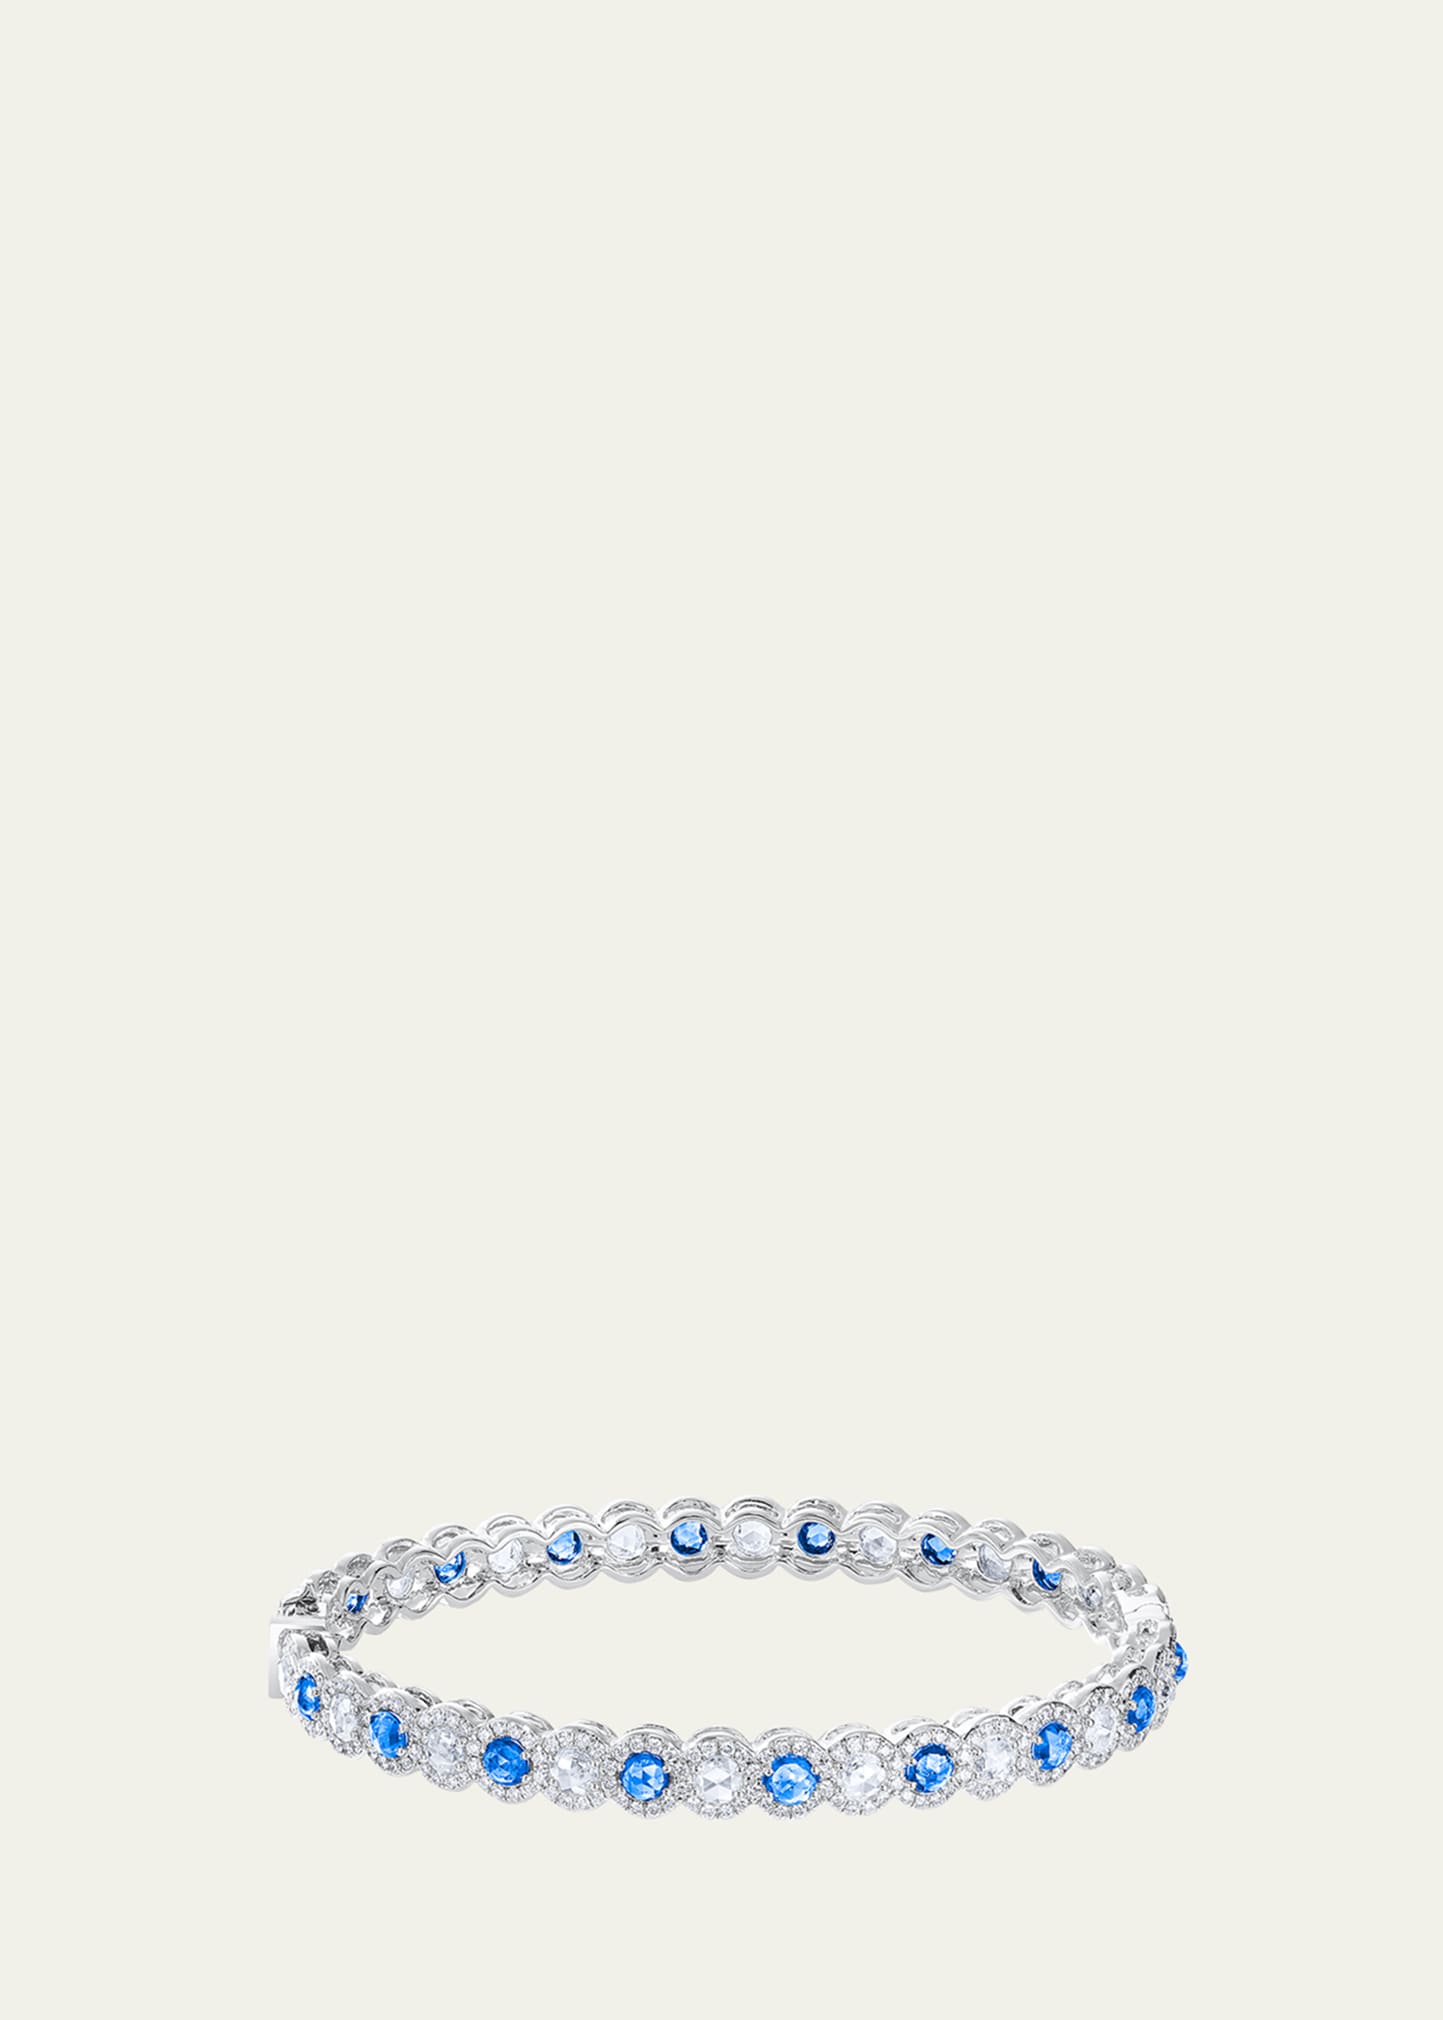 18K White Gold Oval Hinged Bracelet with Diamonds and Blue Sapphires